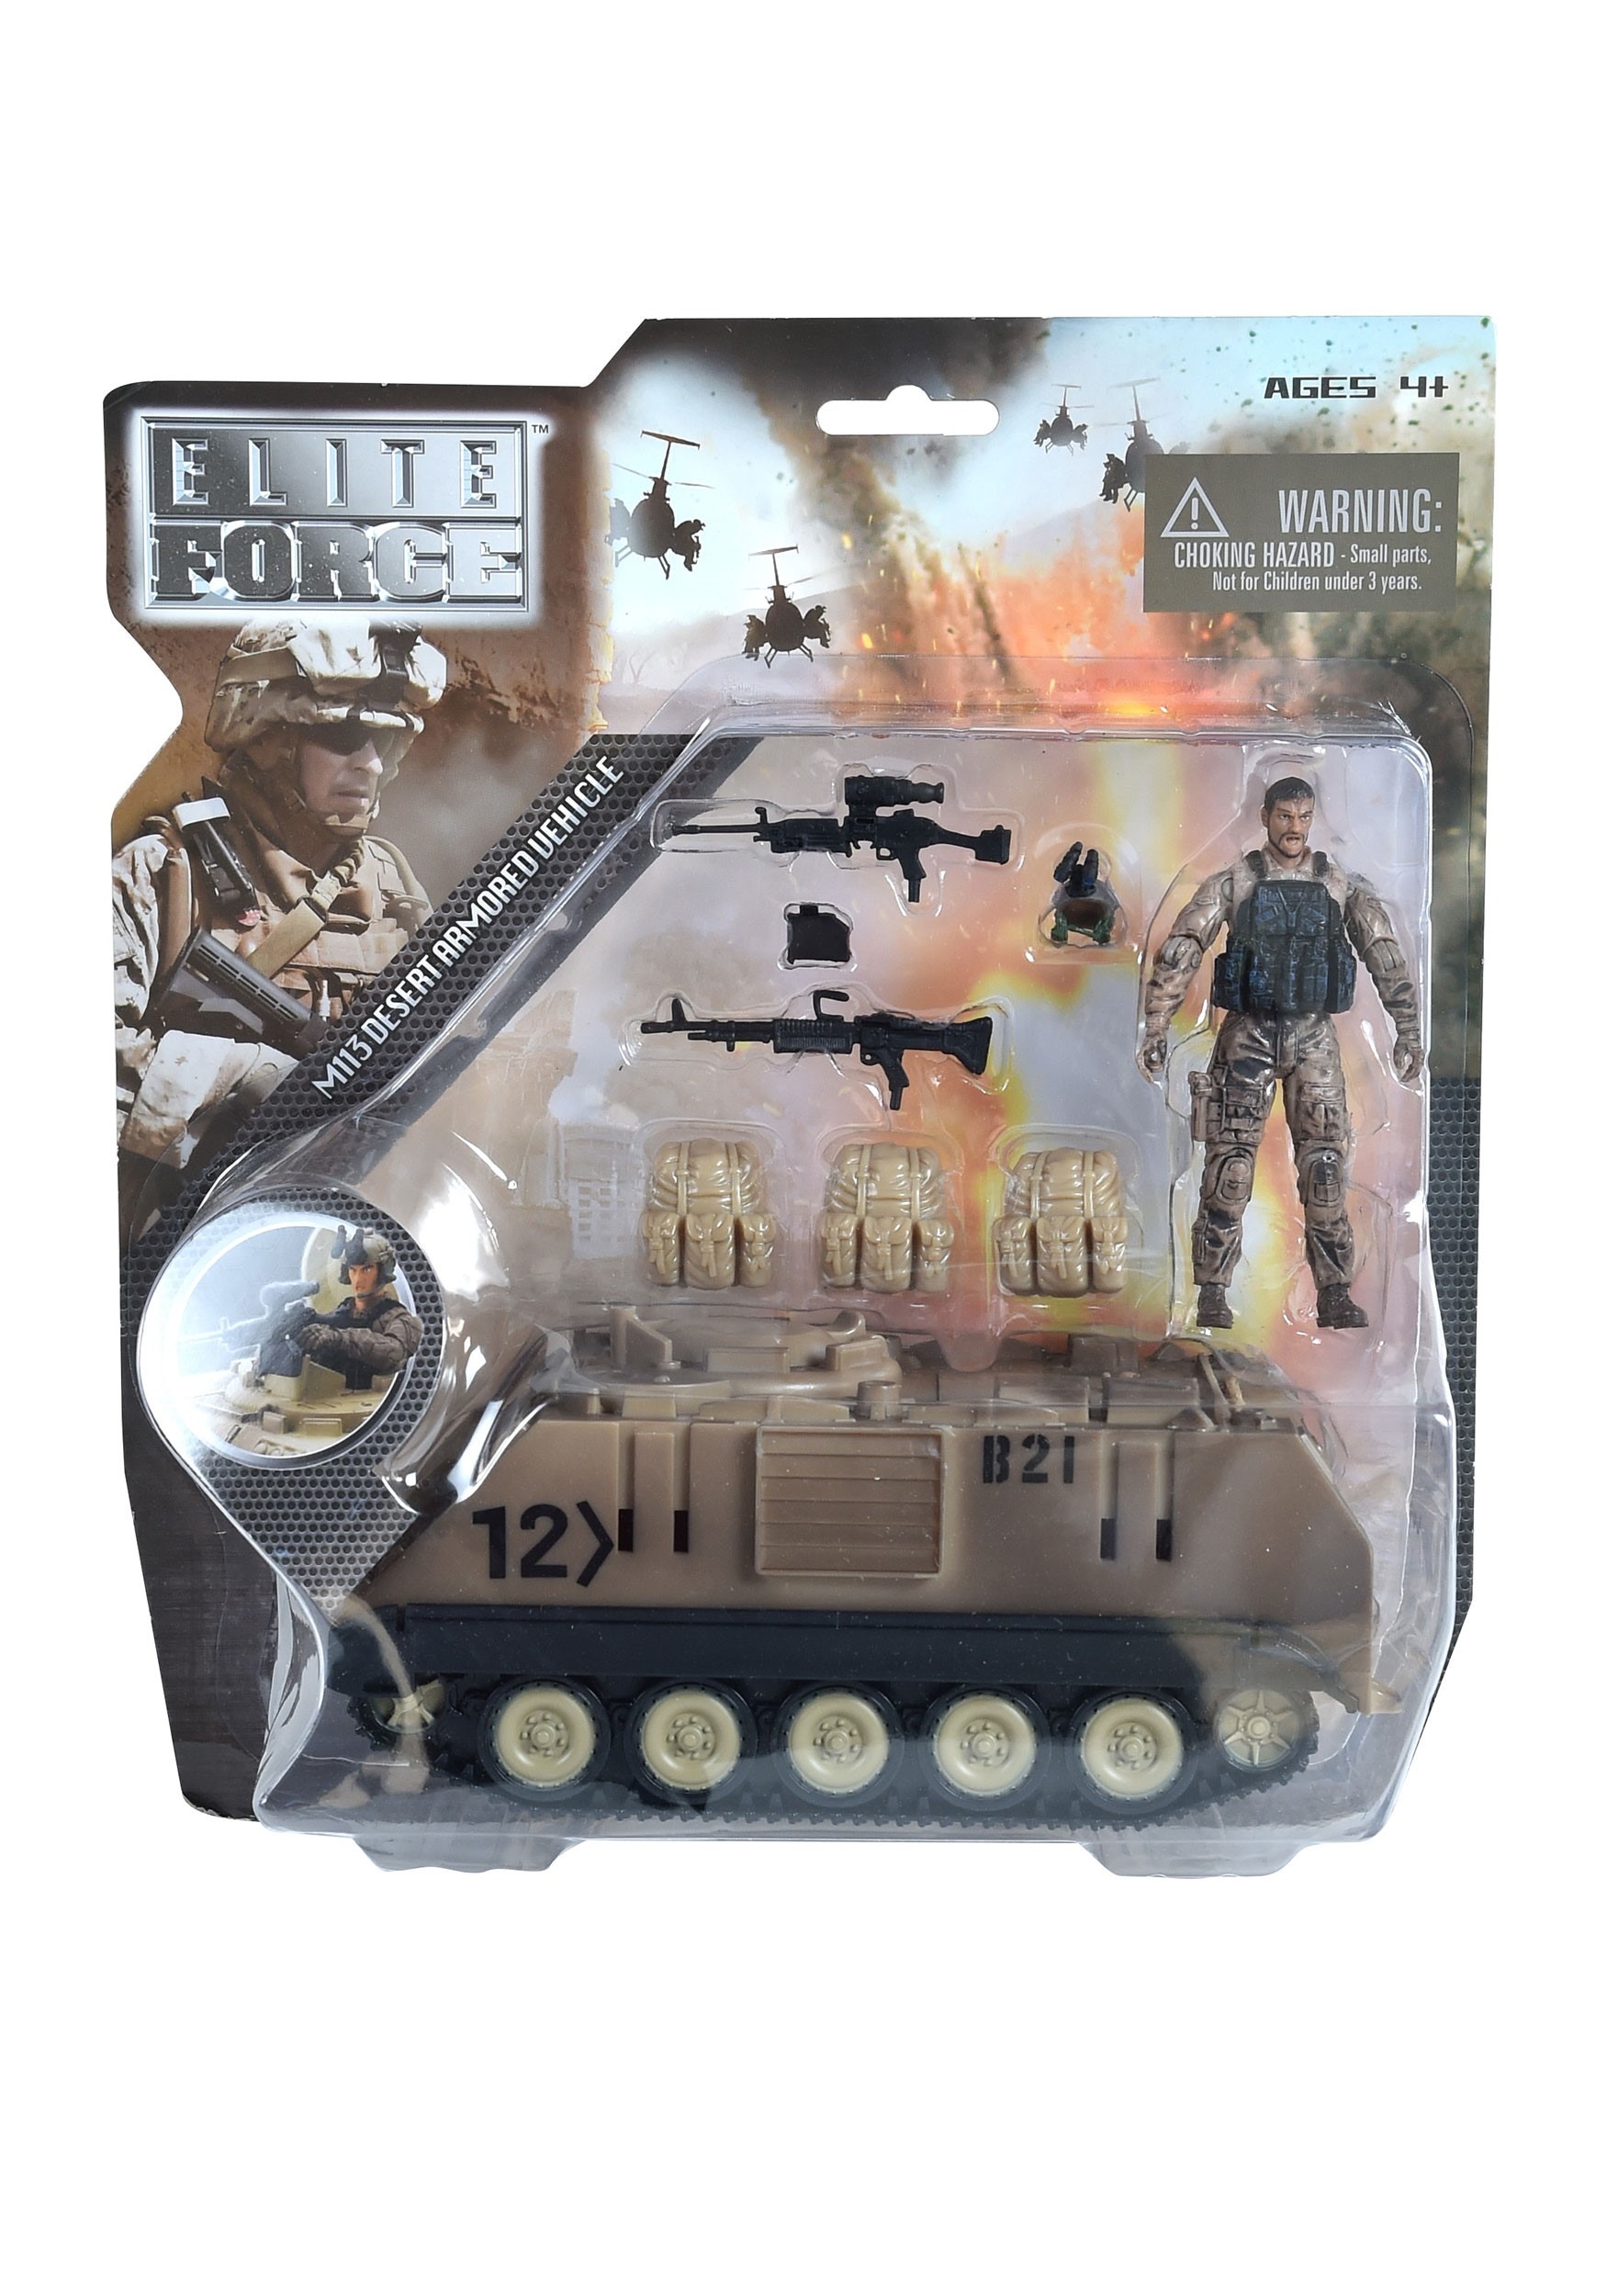 Desert Armored M113 Vehicle w/ Posable Action Figure